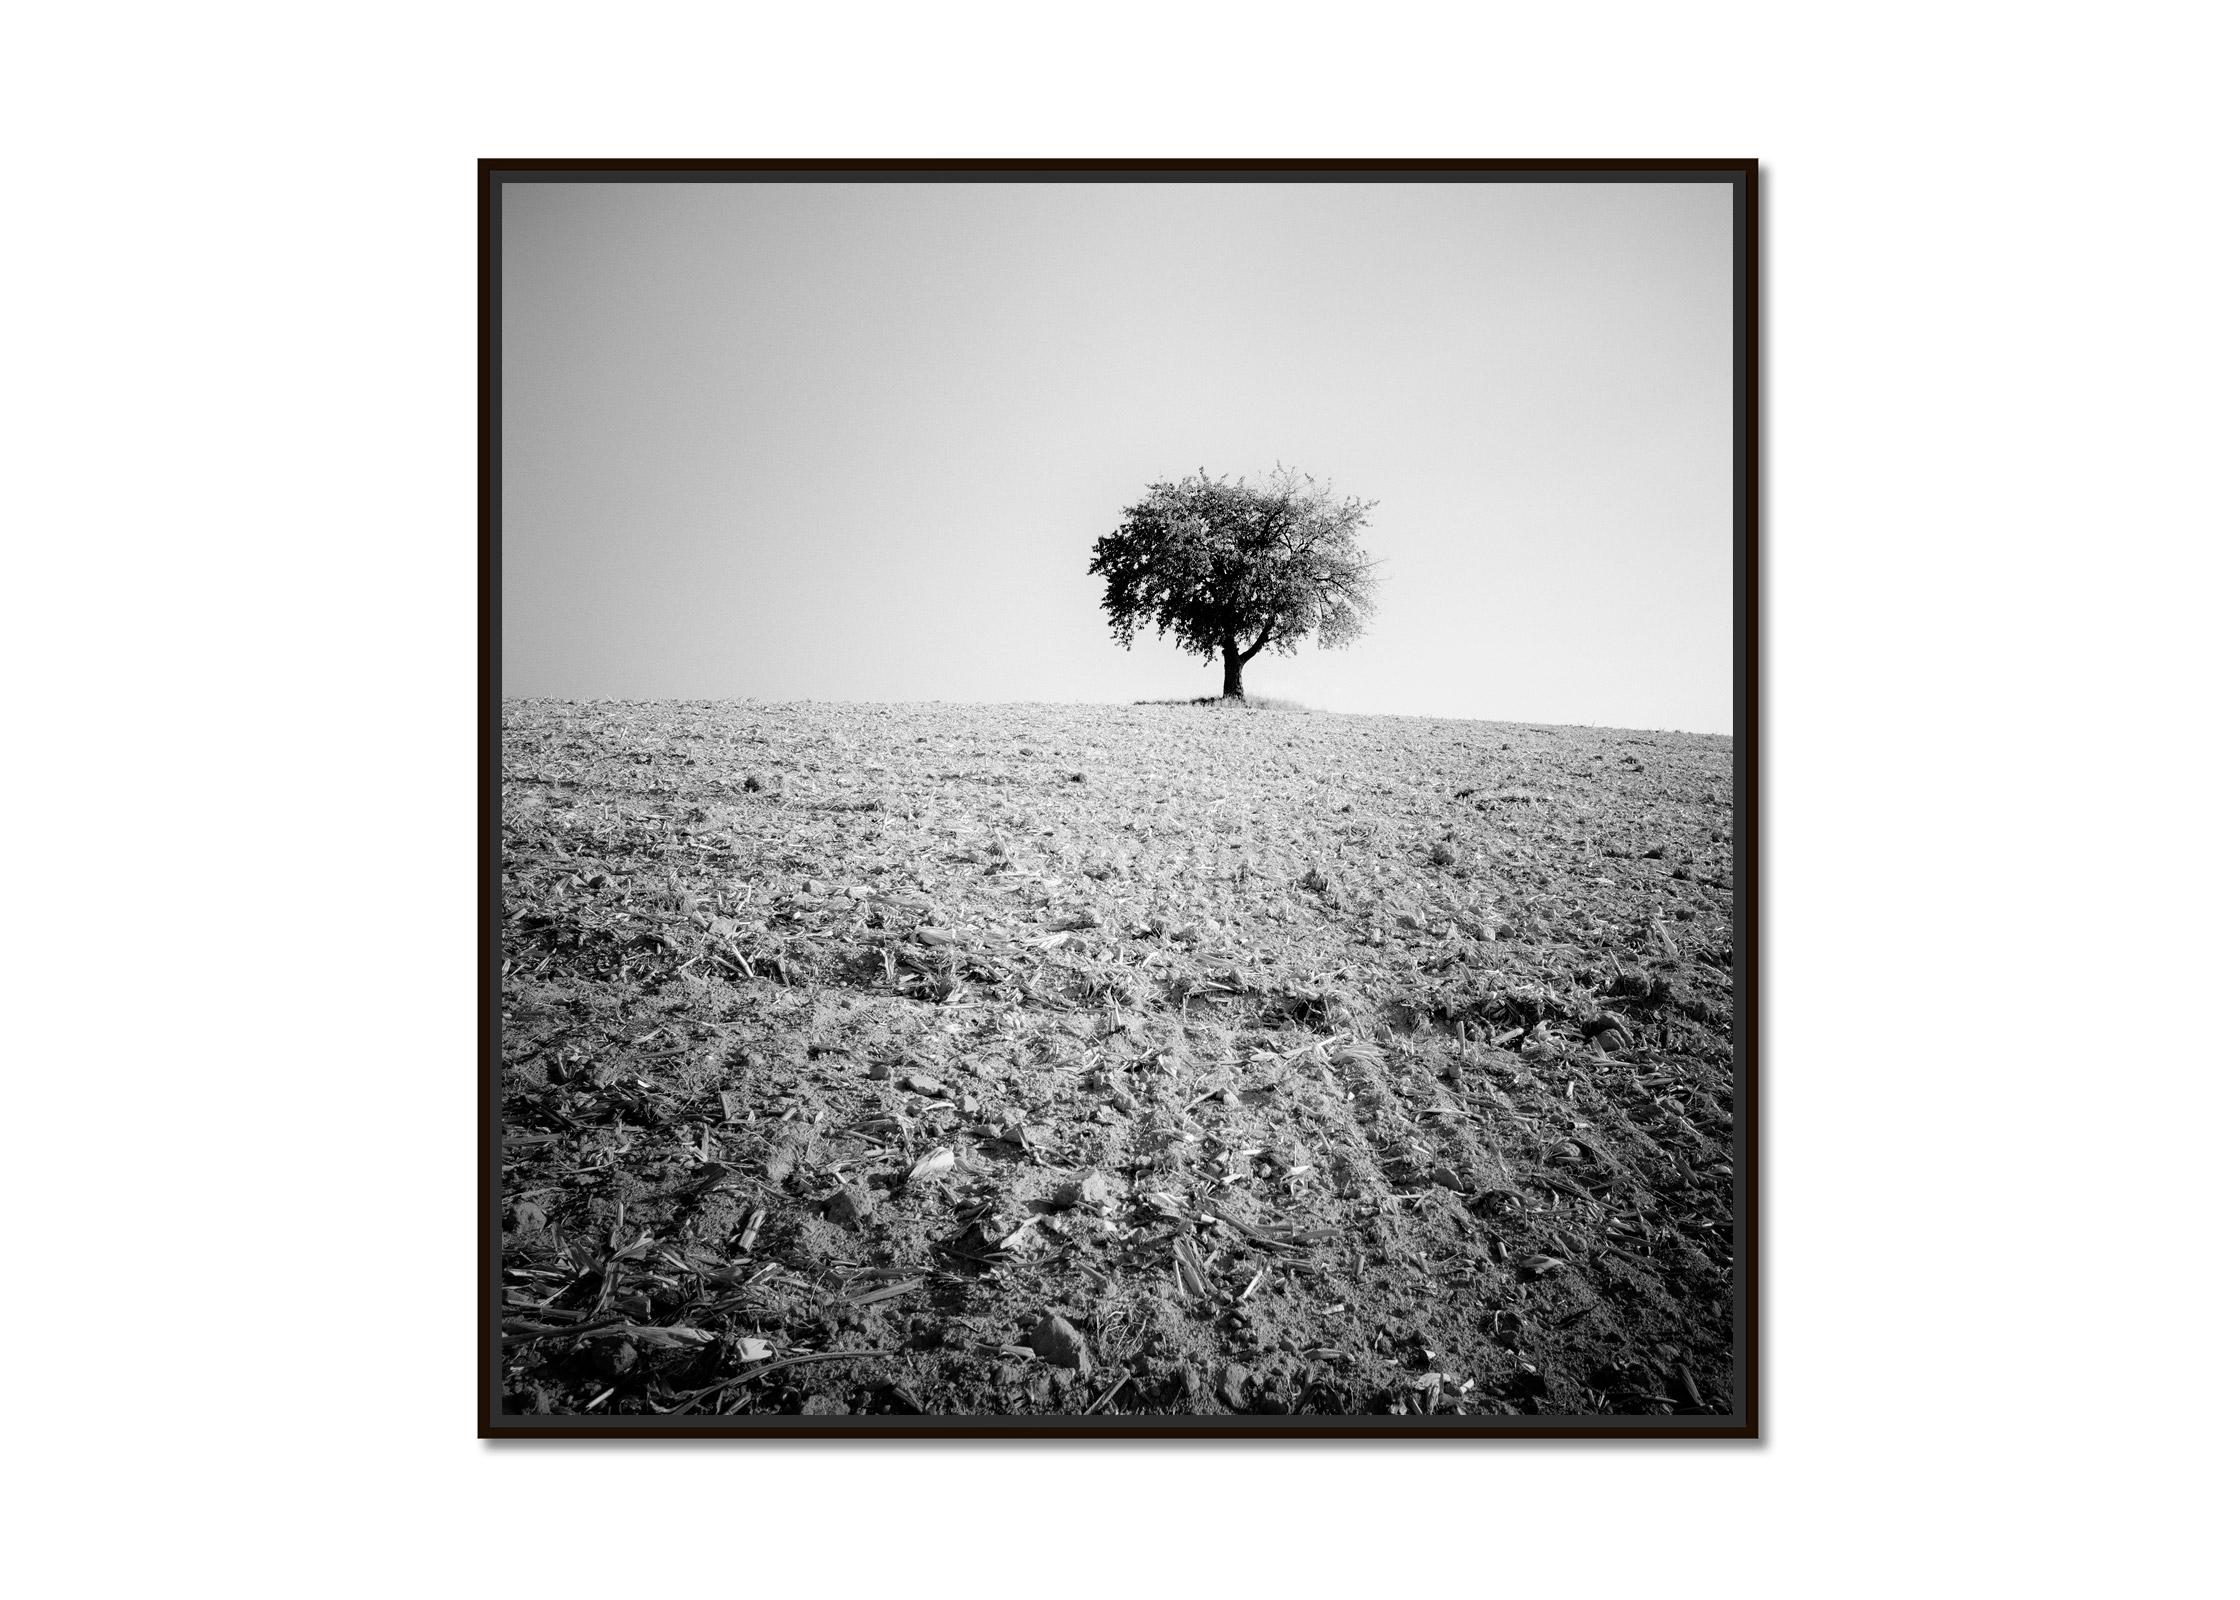 Lonely Tree, harvested Field, black and white minimalist photography, landscape - Photograph by Gerald Berghammer